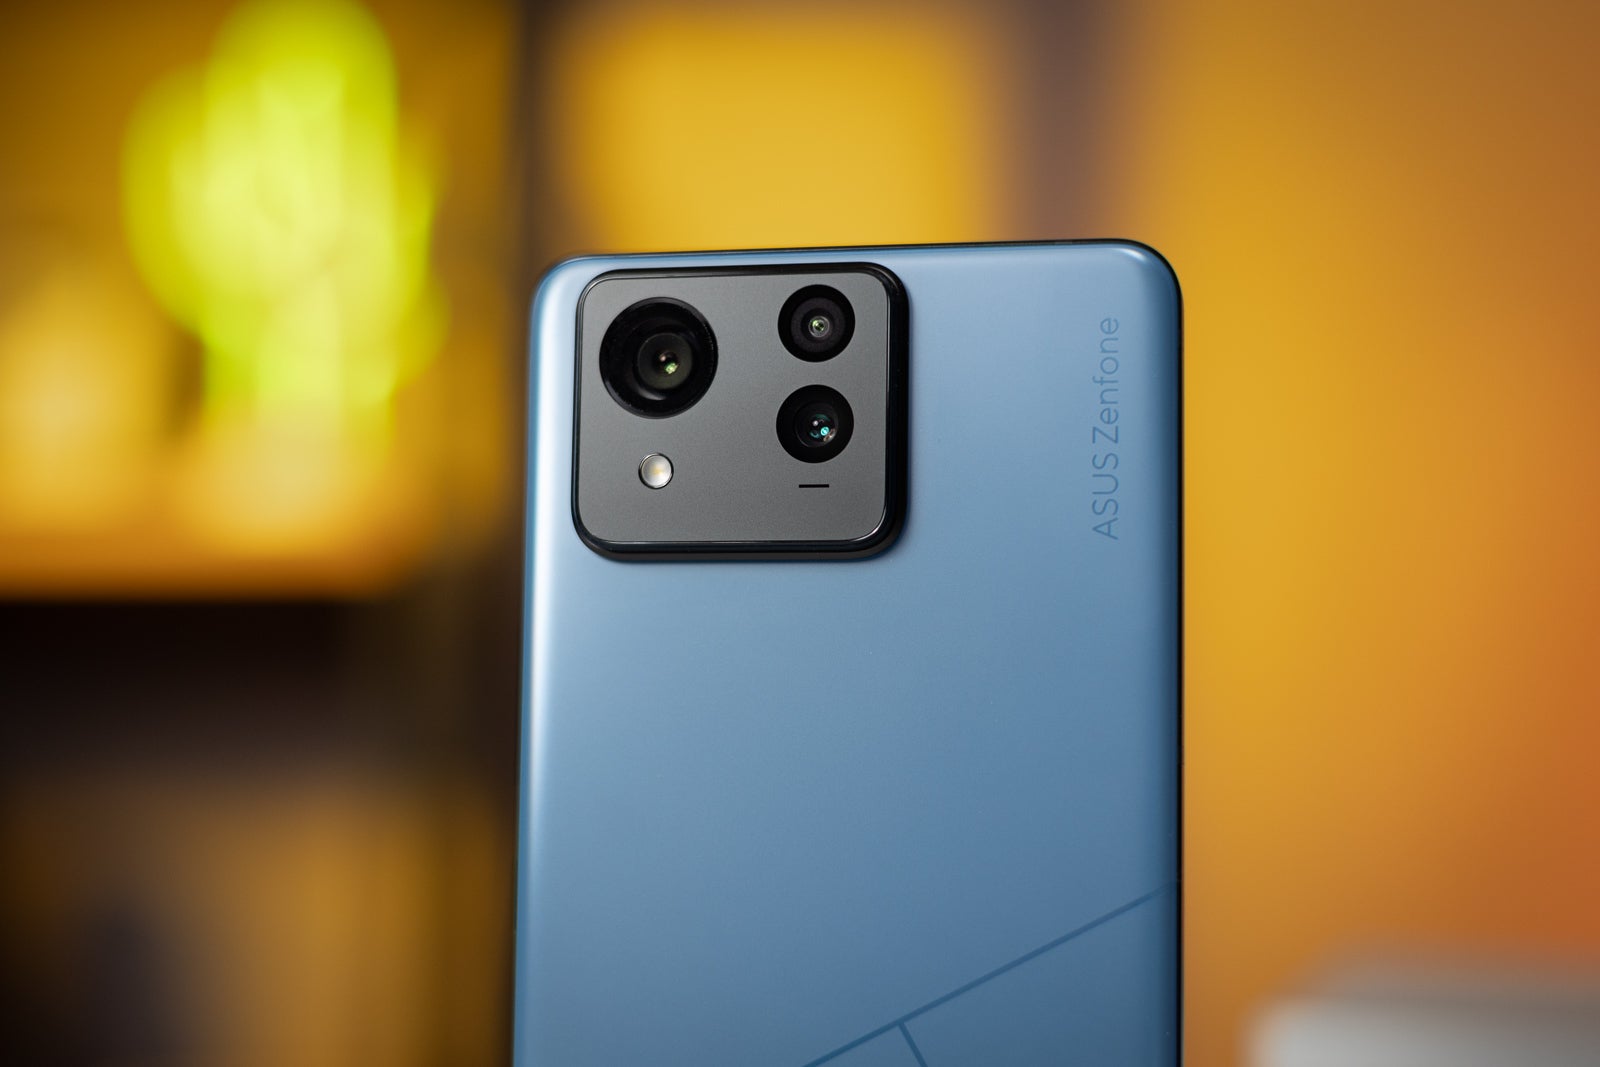 Three cameras proudly occupy the camera bump of the Zenfone 11 Ultra (Image credit - PhoneArena) - Asus Zenfone 11 Ultra Review: A ROG Phone without the sparkle?